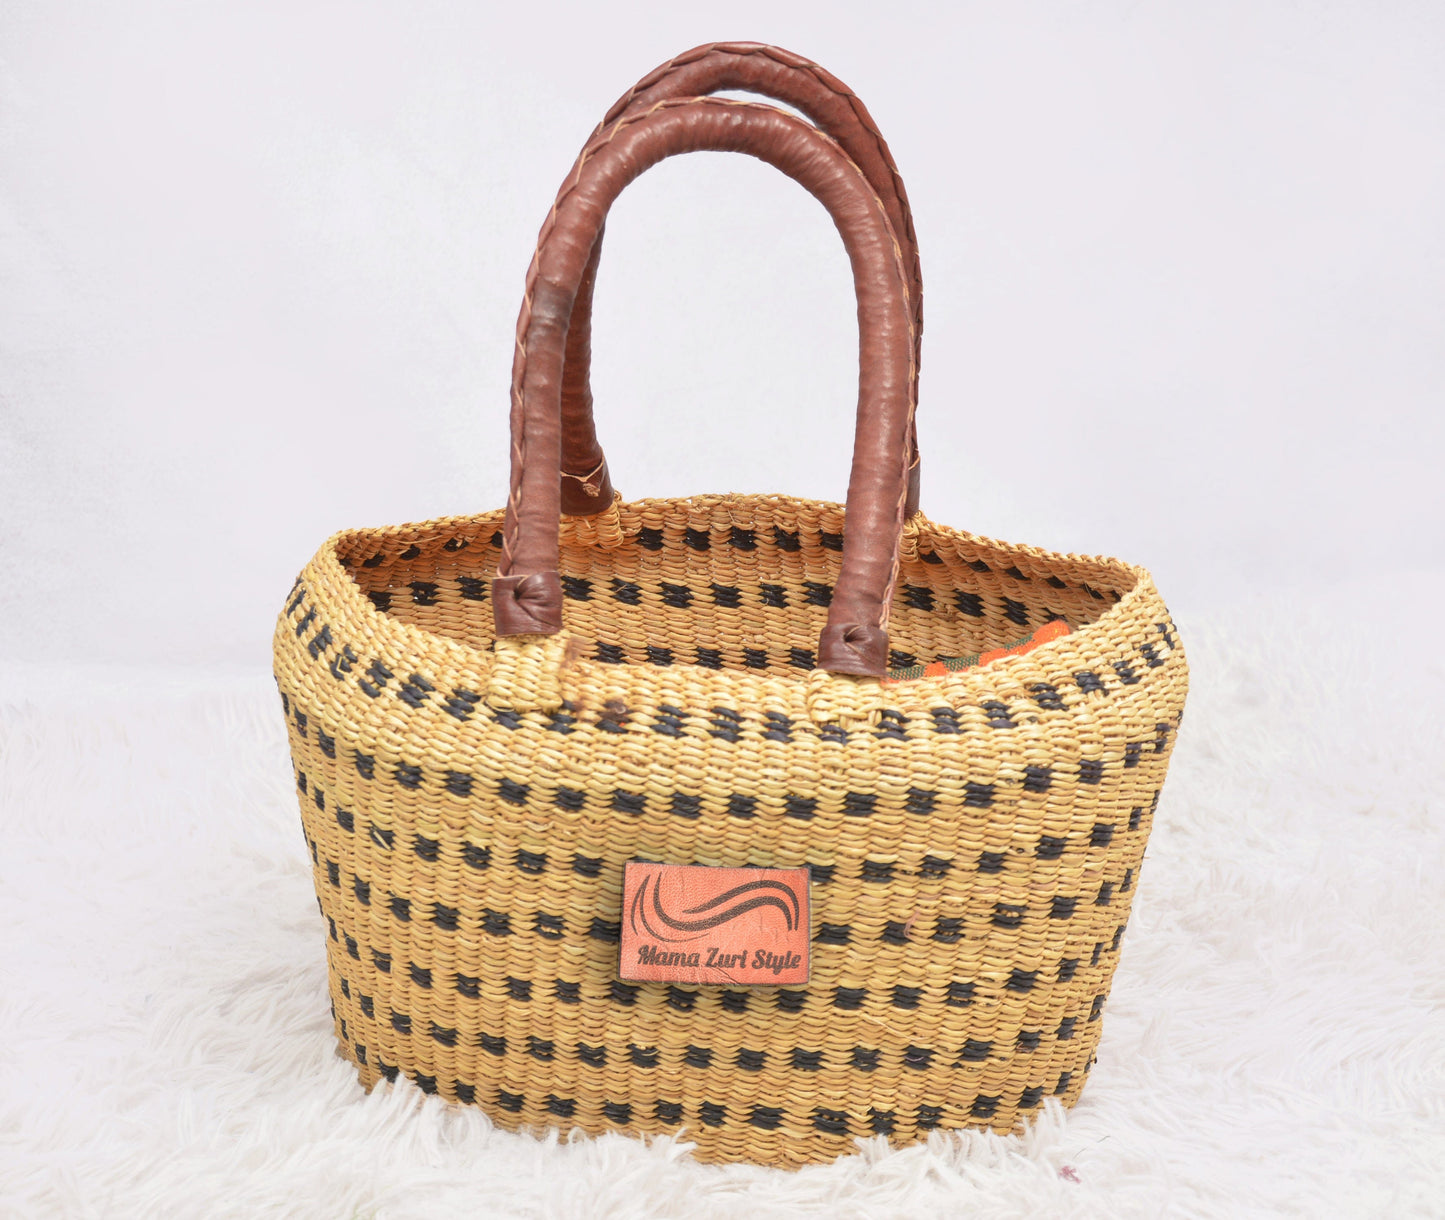 Mama Zuri Style sweetgrass / 6 “ H 12” W Outstanding shopping baskets for women